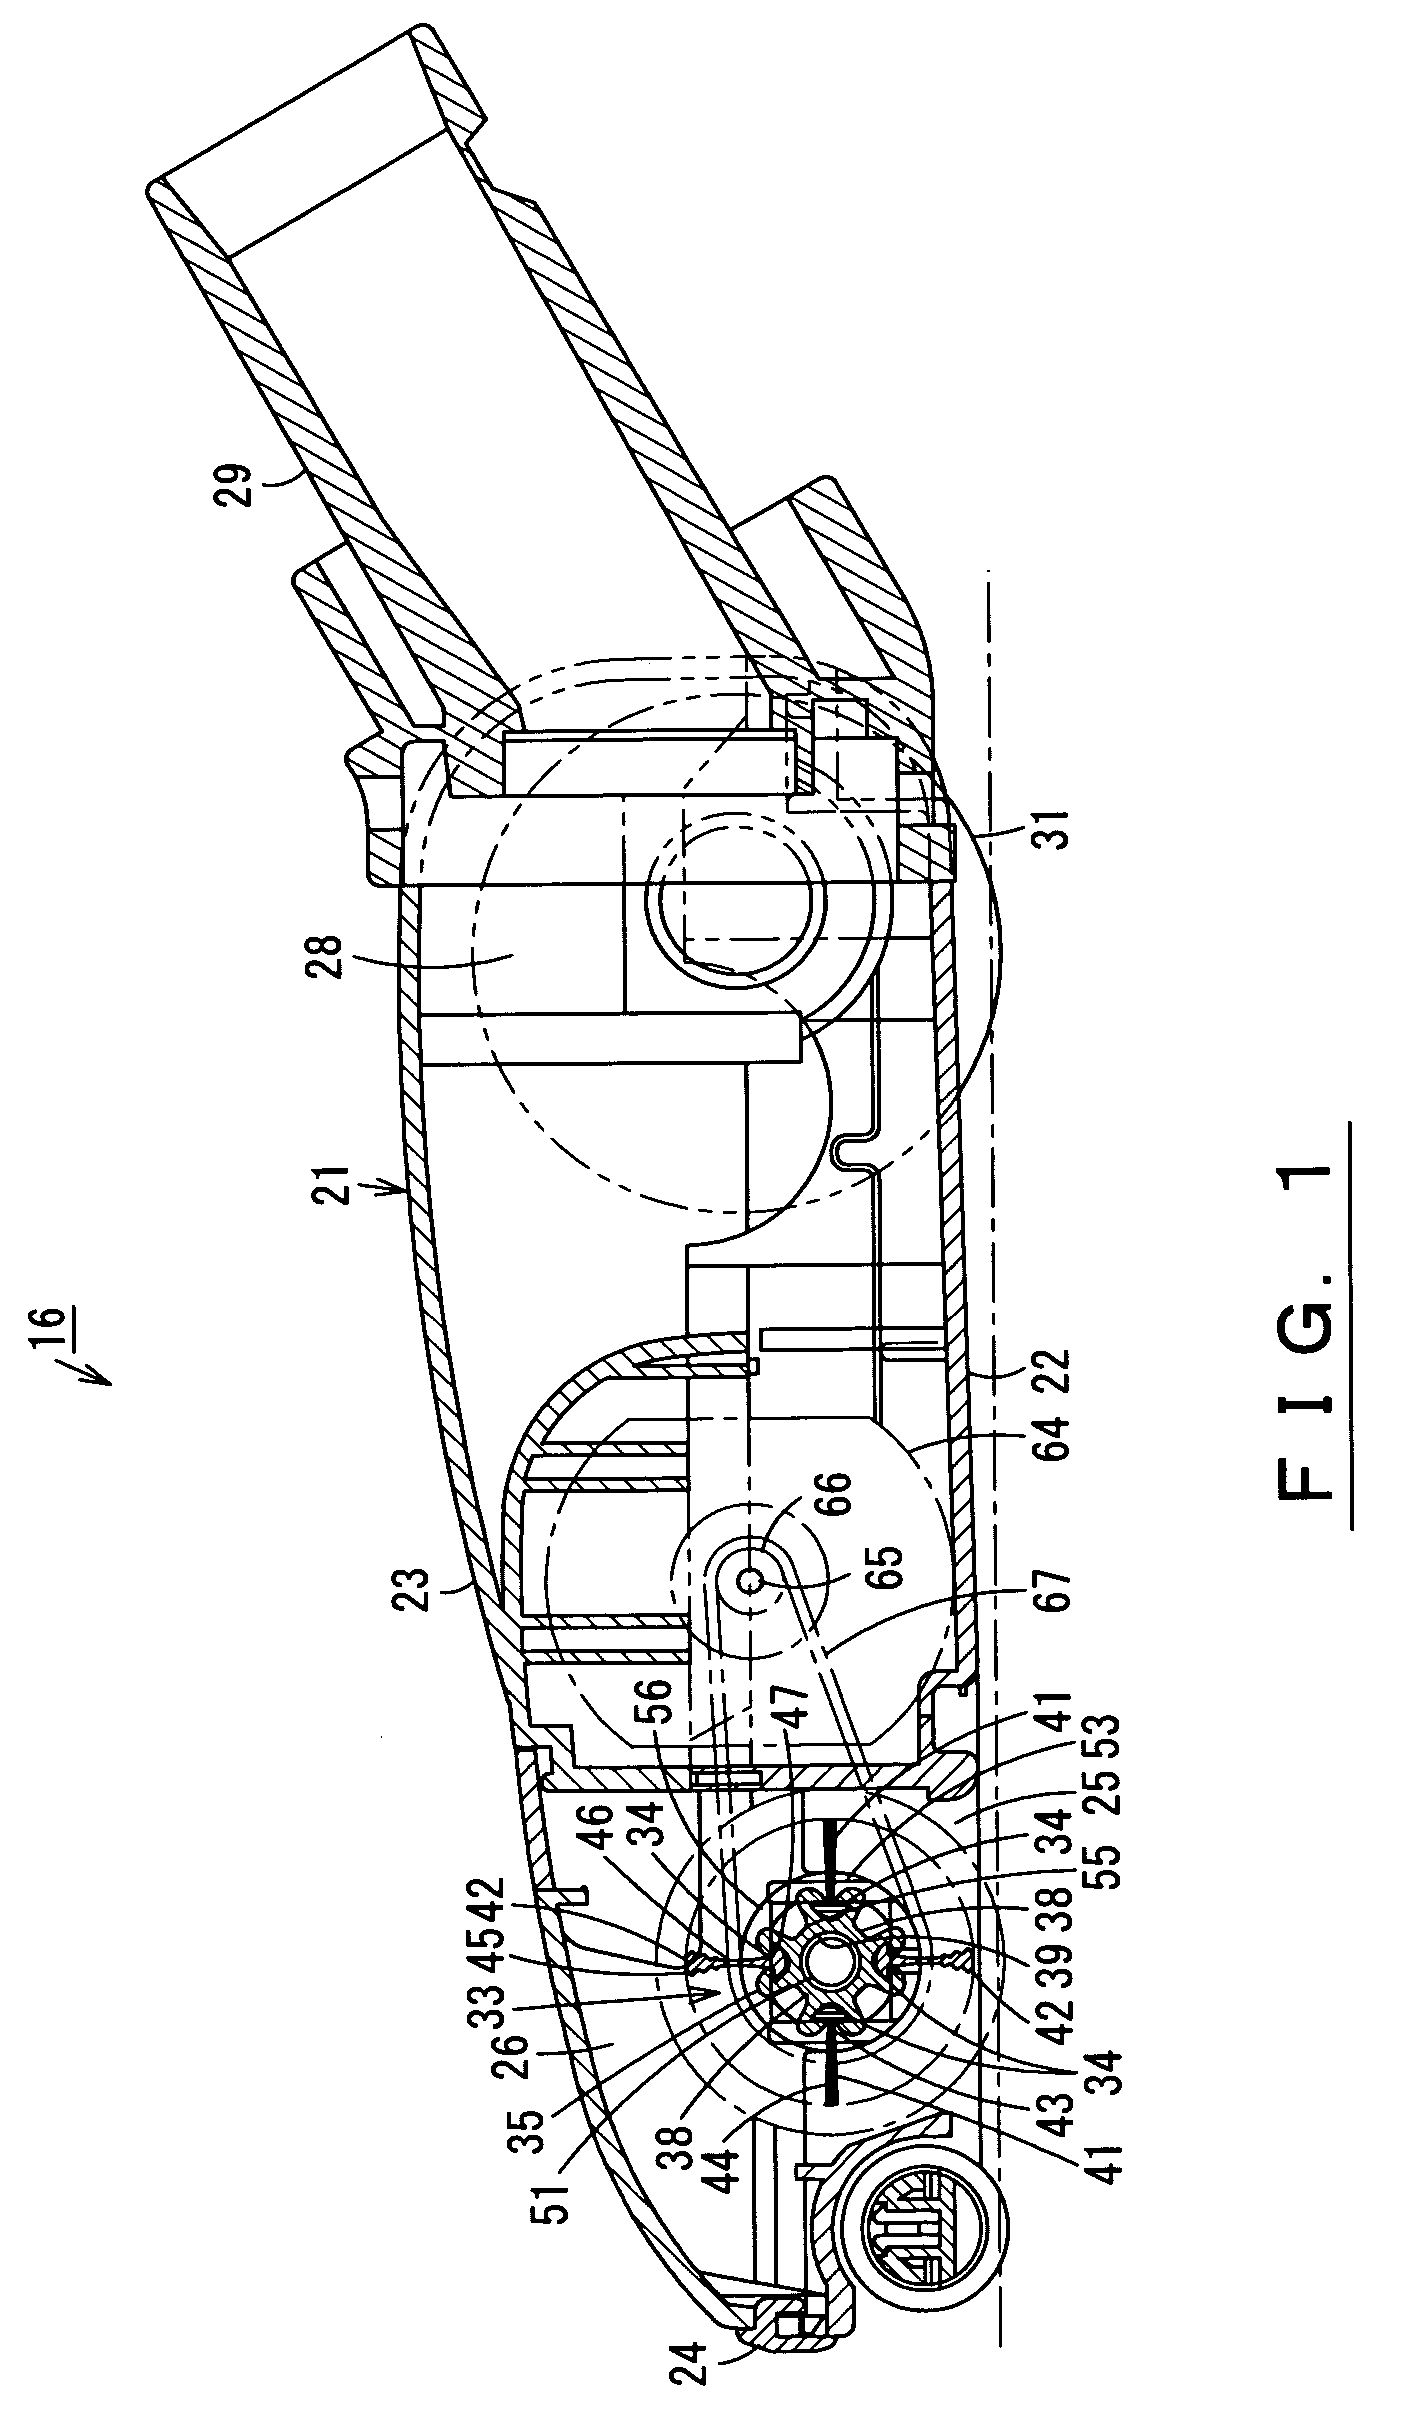 Rotary cleaning body, suction port body of vacuum cleaner, and production method of rotary cleaning body